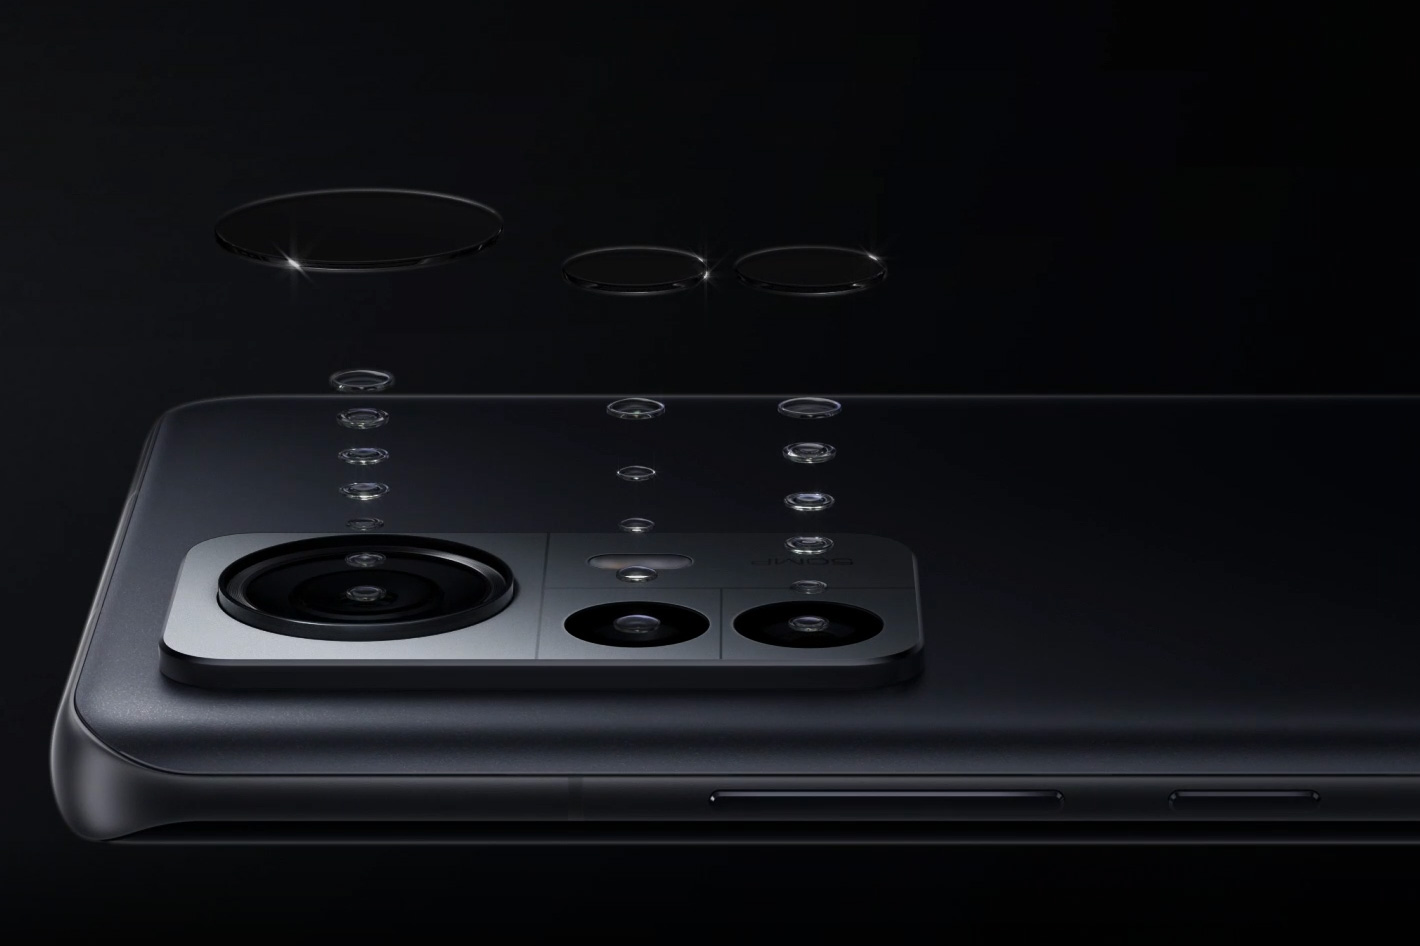 Xiaomi 12 Pro: will the triple 50MP camera array become a standard?